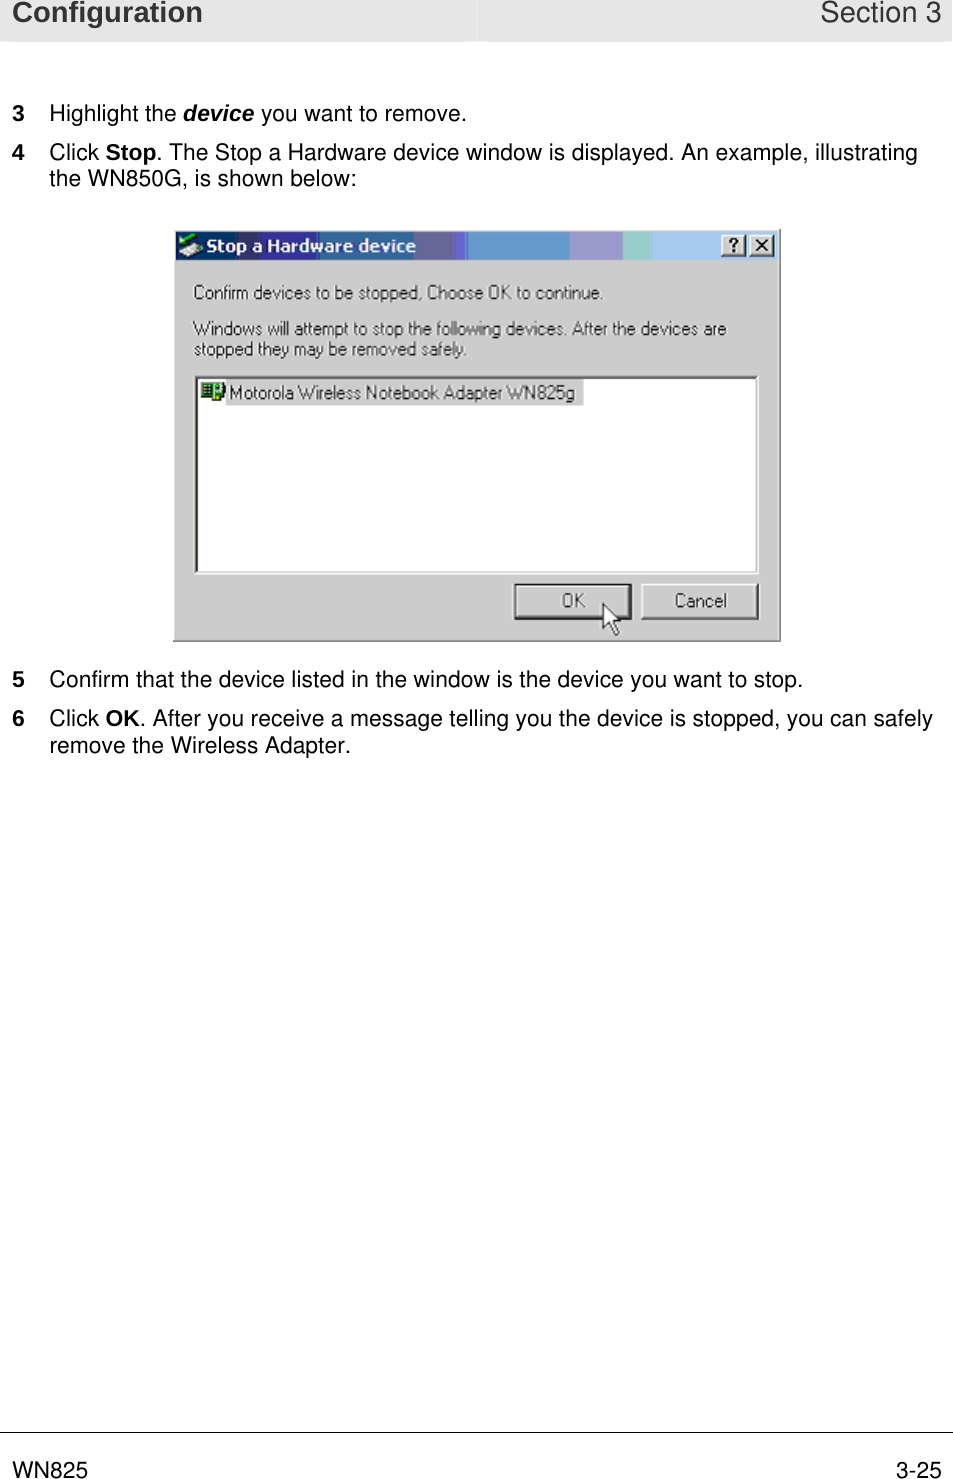 Configuration Section 3 WN825       3-253  Highlight the device you want to remove. 4  Click Stop. The Stop a Hardware device window is displayed. An example, illustrating the WN850G, is shown below:  5  Confirm that the device listed in the window is the device you want to stop. 6  Click OK. After you receive a message telling you the device is stopped, you can safely remove the Wireless Adapter.  